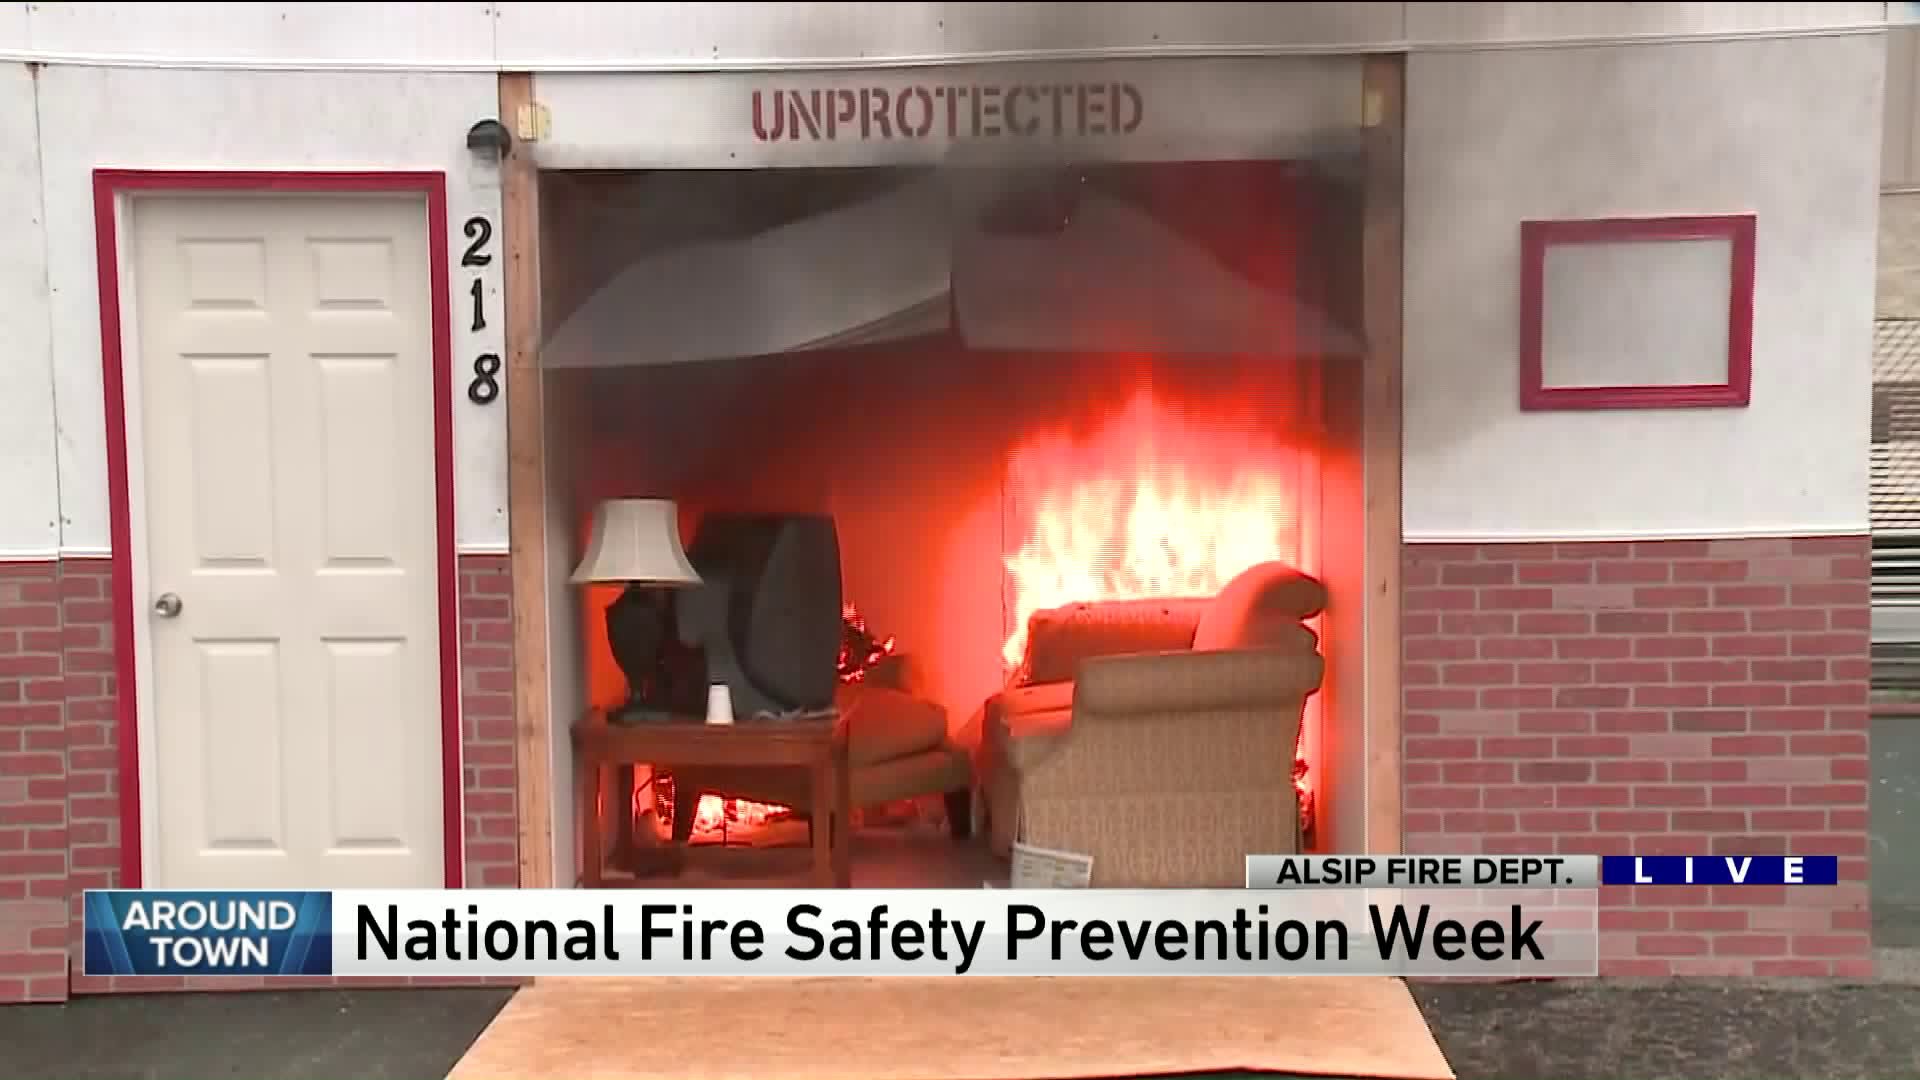 Around Town & National Fire Safety Prevention Week